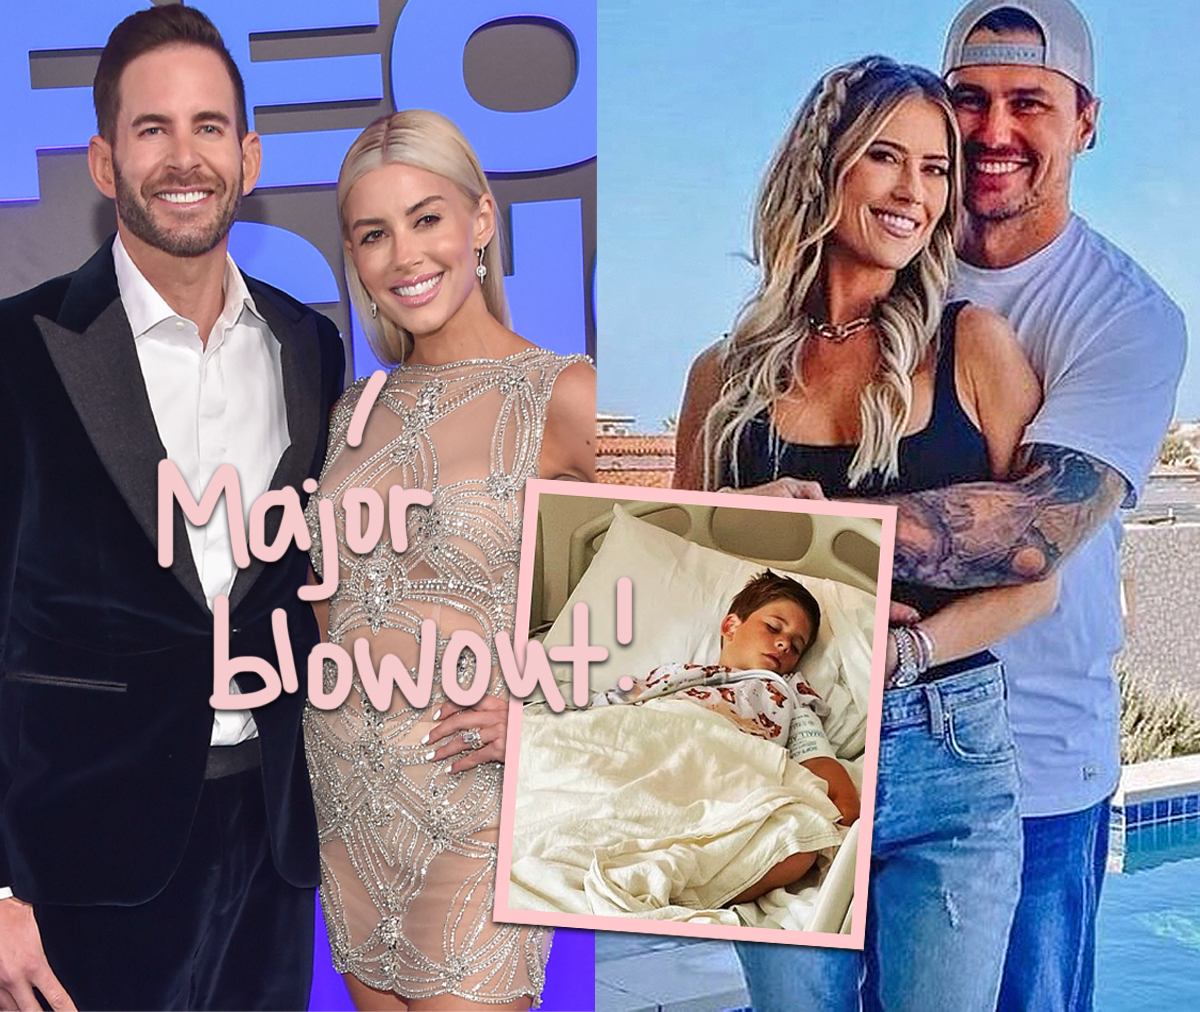 #Tarek El Moussa & Heather Rae Young Caught FIGHTING With His Ex-Wife Christina Haack & Josh Hall A DAY Before Son’s Hospital Scare